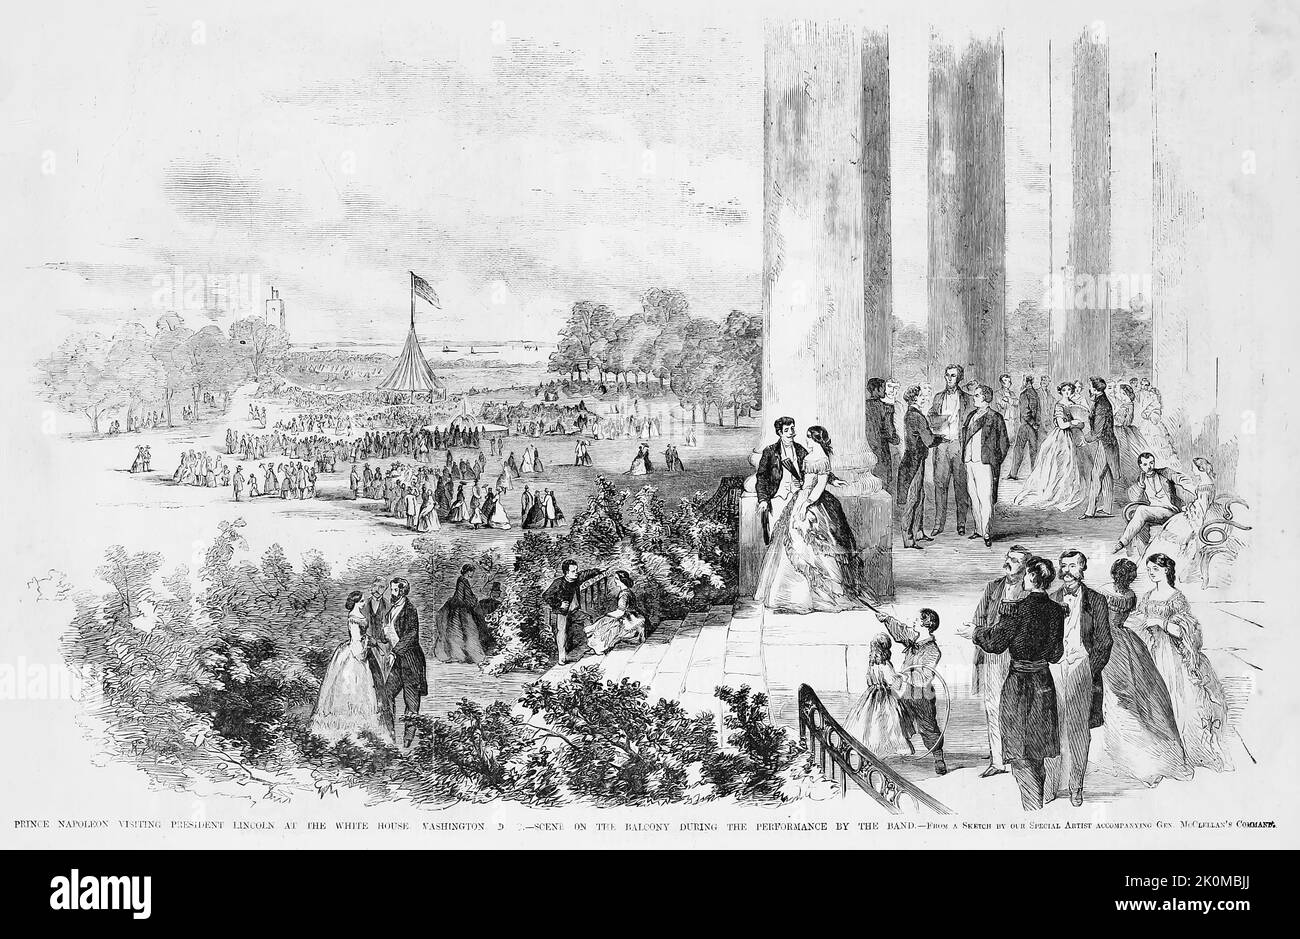 Prince Napoléon Joseph Charles Paul Bonaparte visiting President Abraham Lincoln at the White House, Washington, D. C. - Scene on the balcony during the performance by the band. August 1861. 19th century American Civil War illustration from Frank Leslie's Illustrated Newspaper Stock Photo